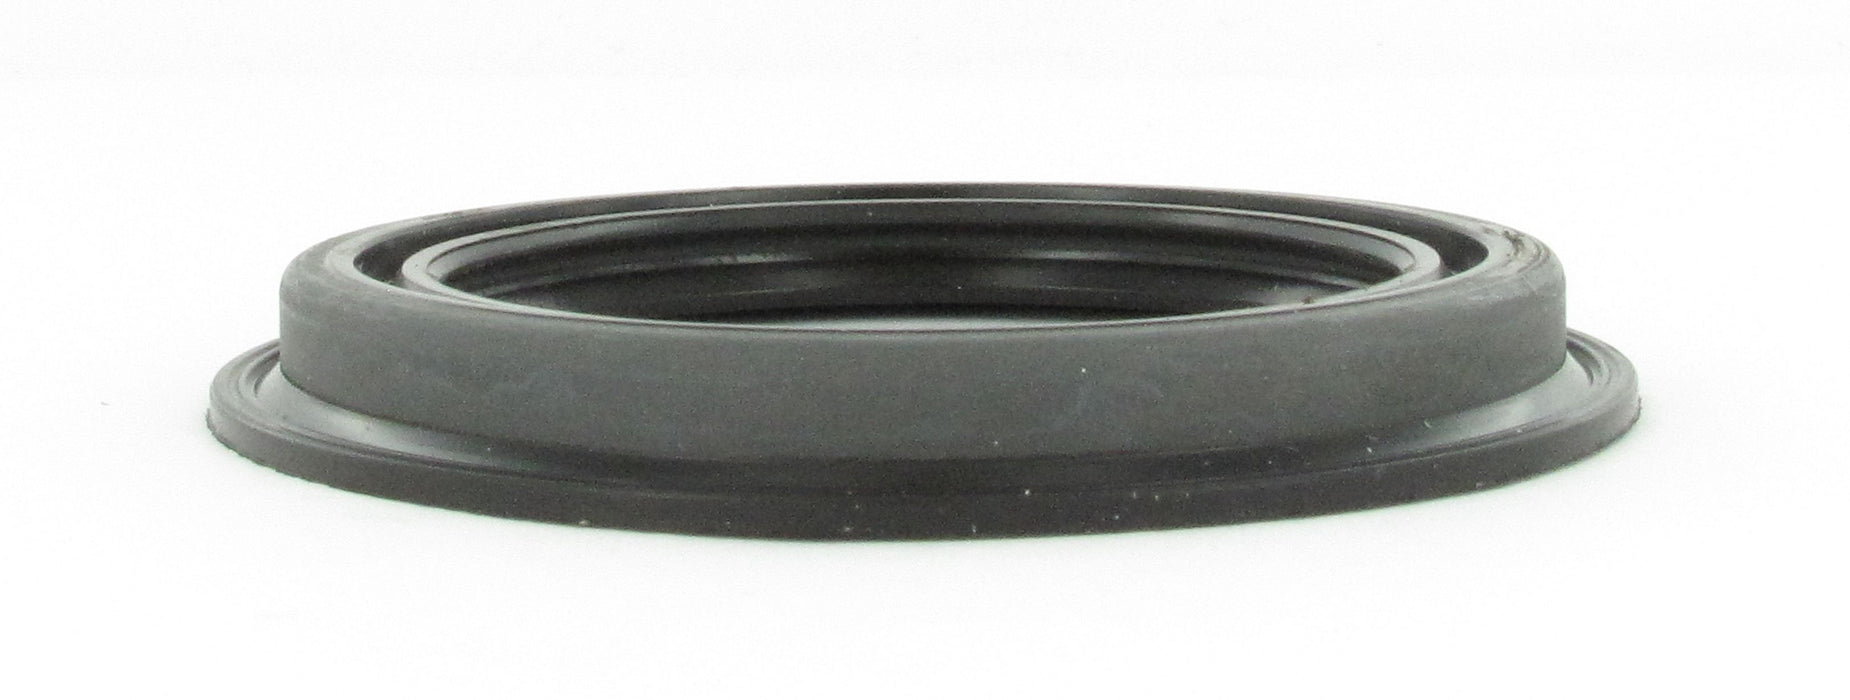 Front Wheel Seal for Mercury Cougar 1988 1987 1986 1985 1984 1983 1982 1981 1980 1979 1978 1977 1976 1975 1974 1973 1972 1971 1970 1969 1968 - SKF1